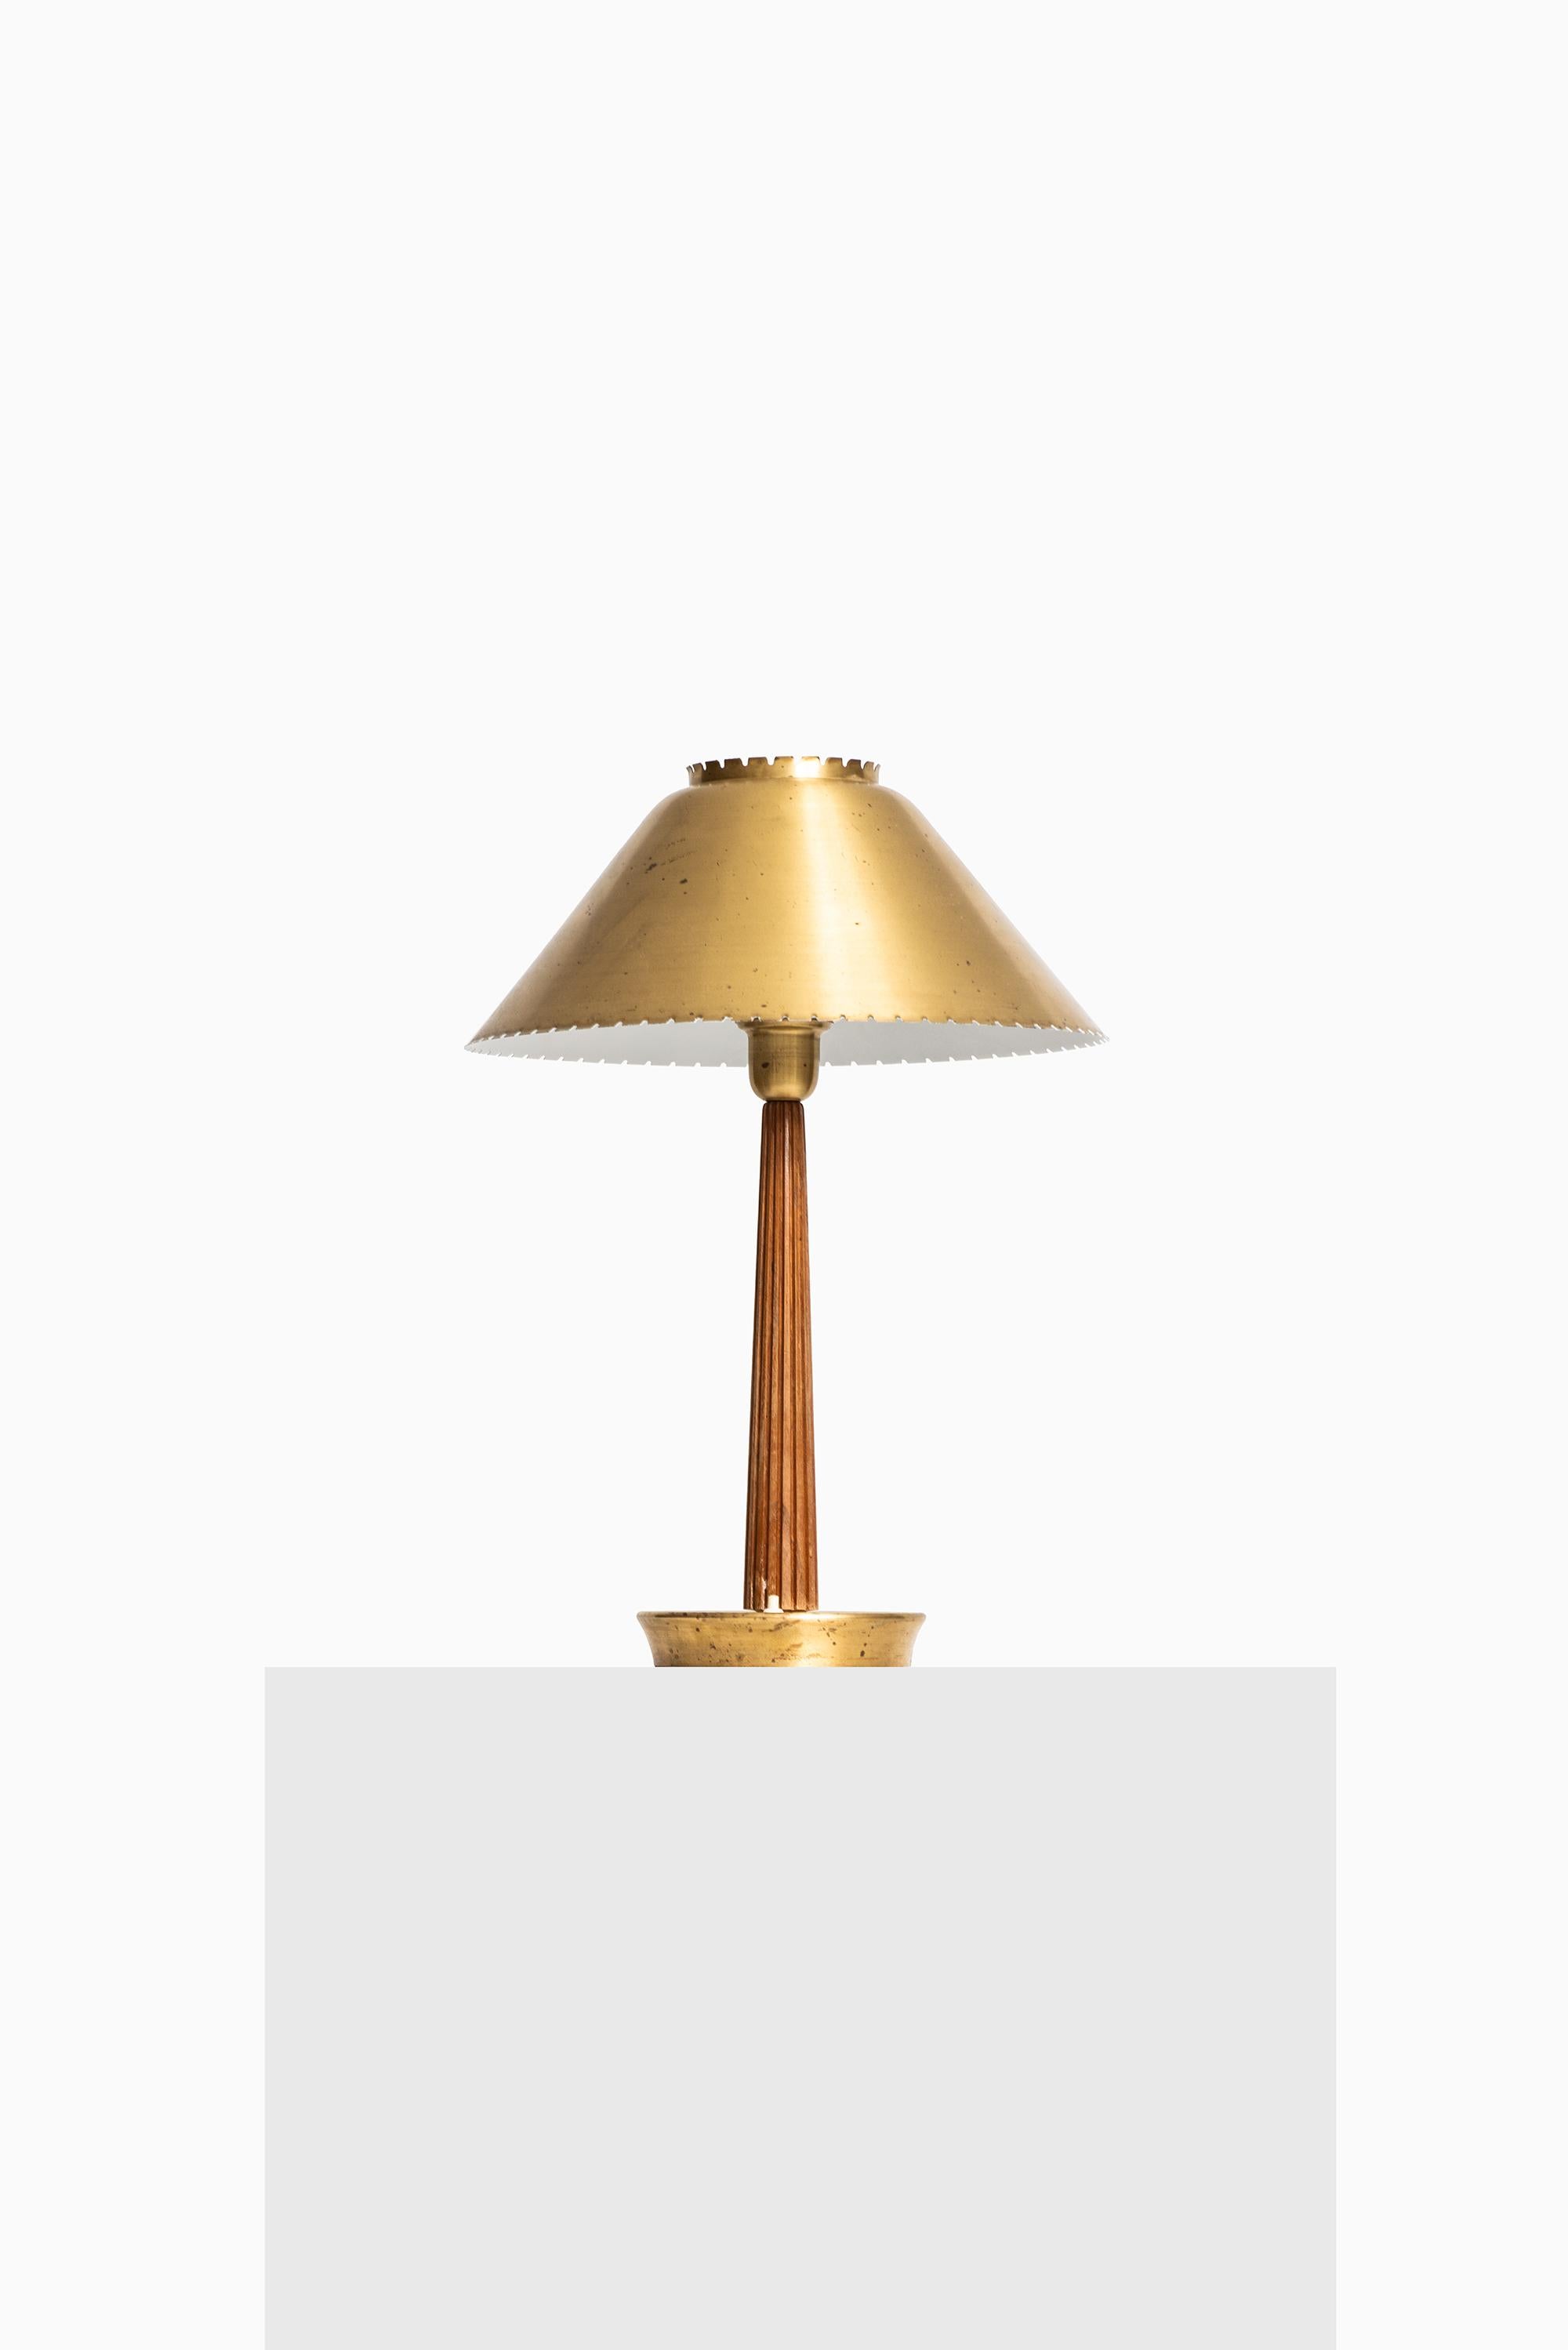 Rare table lamp designed by Hans Bergström. Produced by ASEA in Sweden.